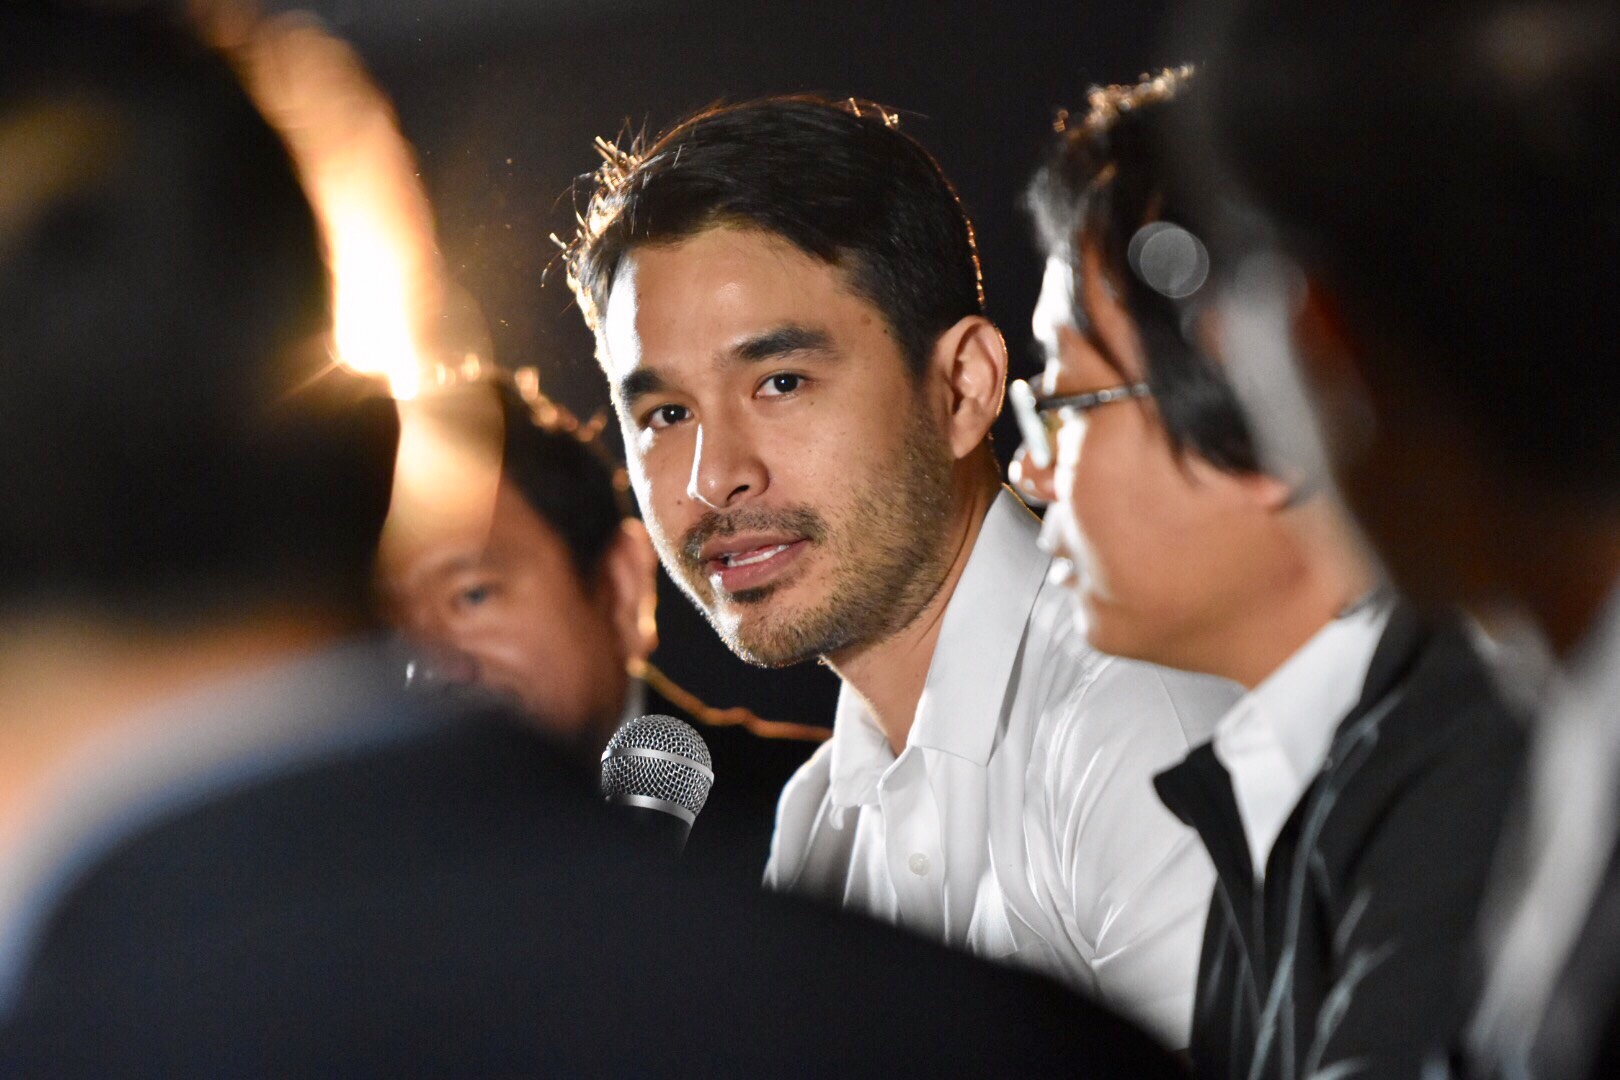 WARMER. Award-winning broadcast journalist Atom Araullo's documentary 'Warmer' wins the Bronze World Medal at the 2017 New York Festivals Television and Film Awards. Photo by Leanne Jazul/Rappler